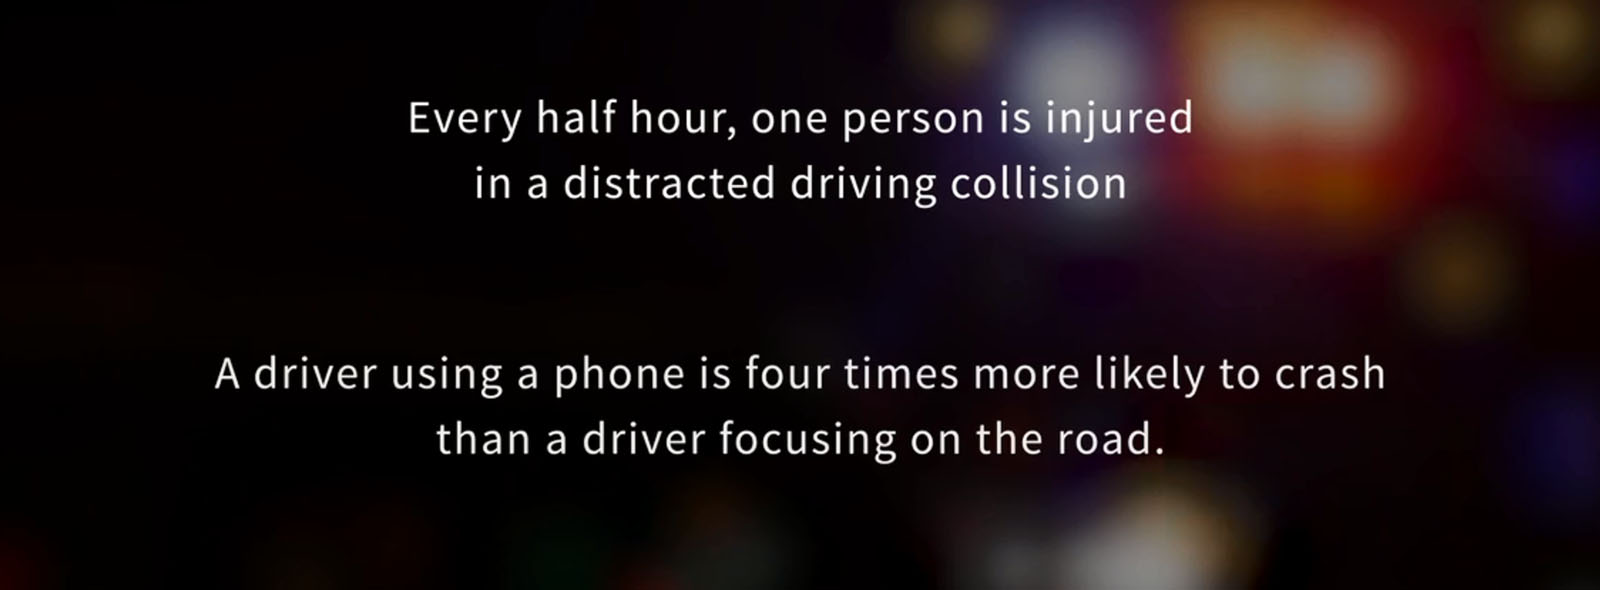 Distracted driving statistics via Ministry of Transportation